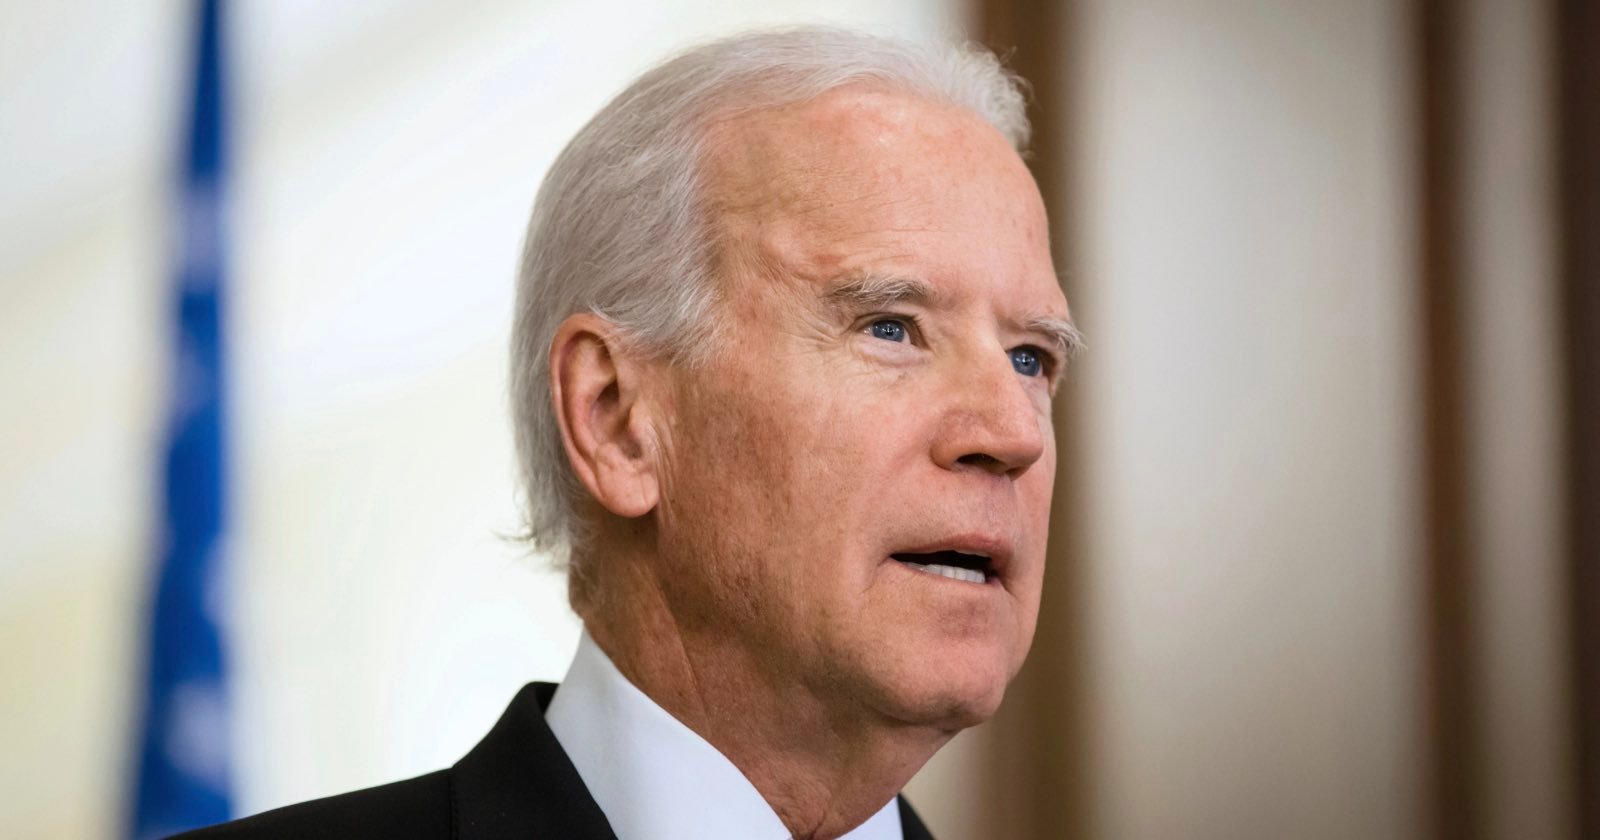 White House Wants to Cryptographically Verify Videos of Biden to Fight Deepfakes